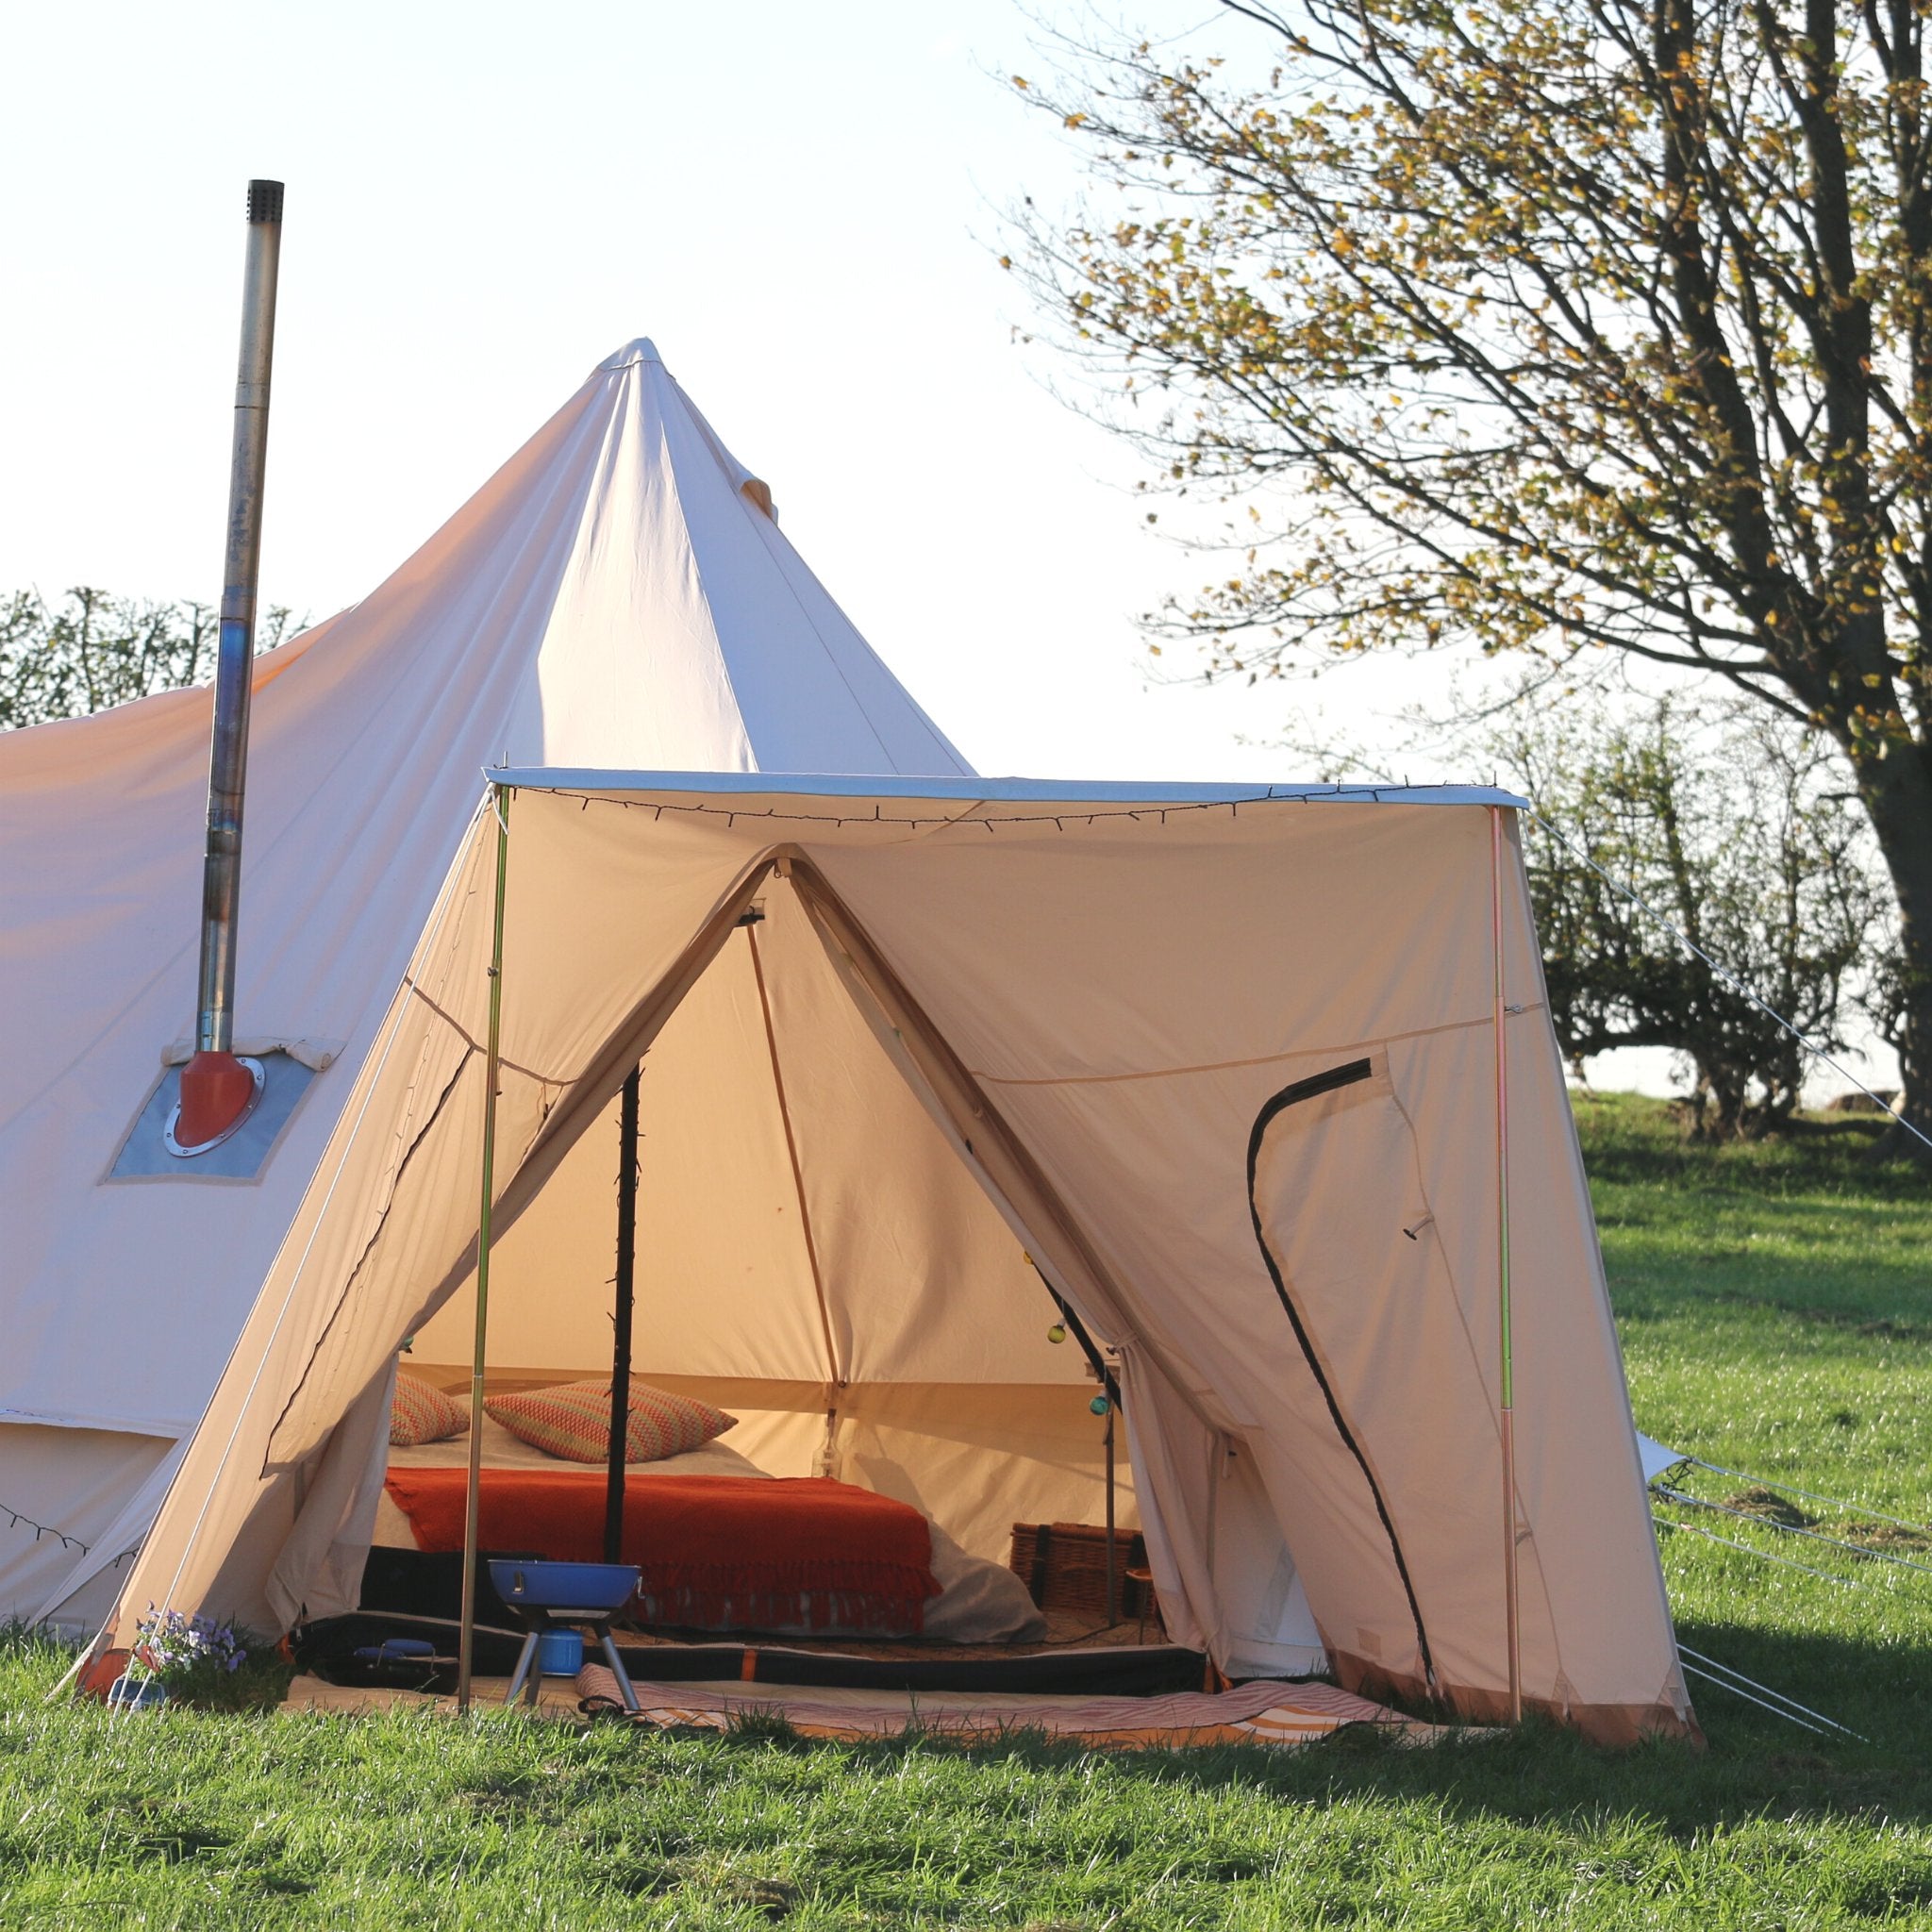 Glamorous Camping Tarps, Tents, Canopies and Shelters